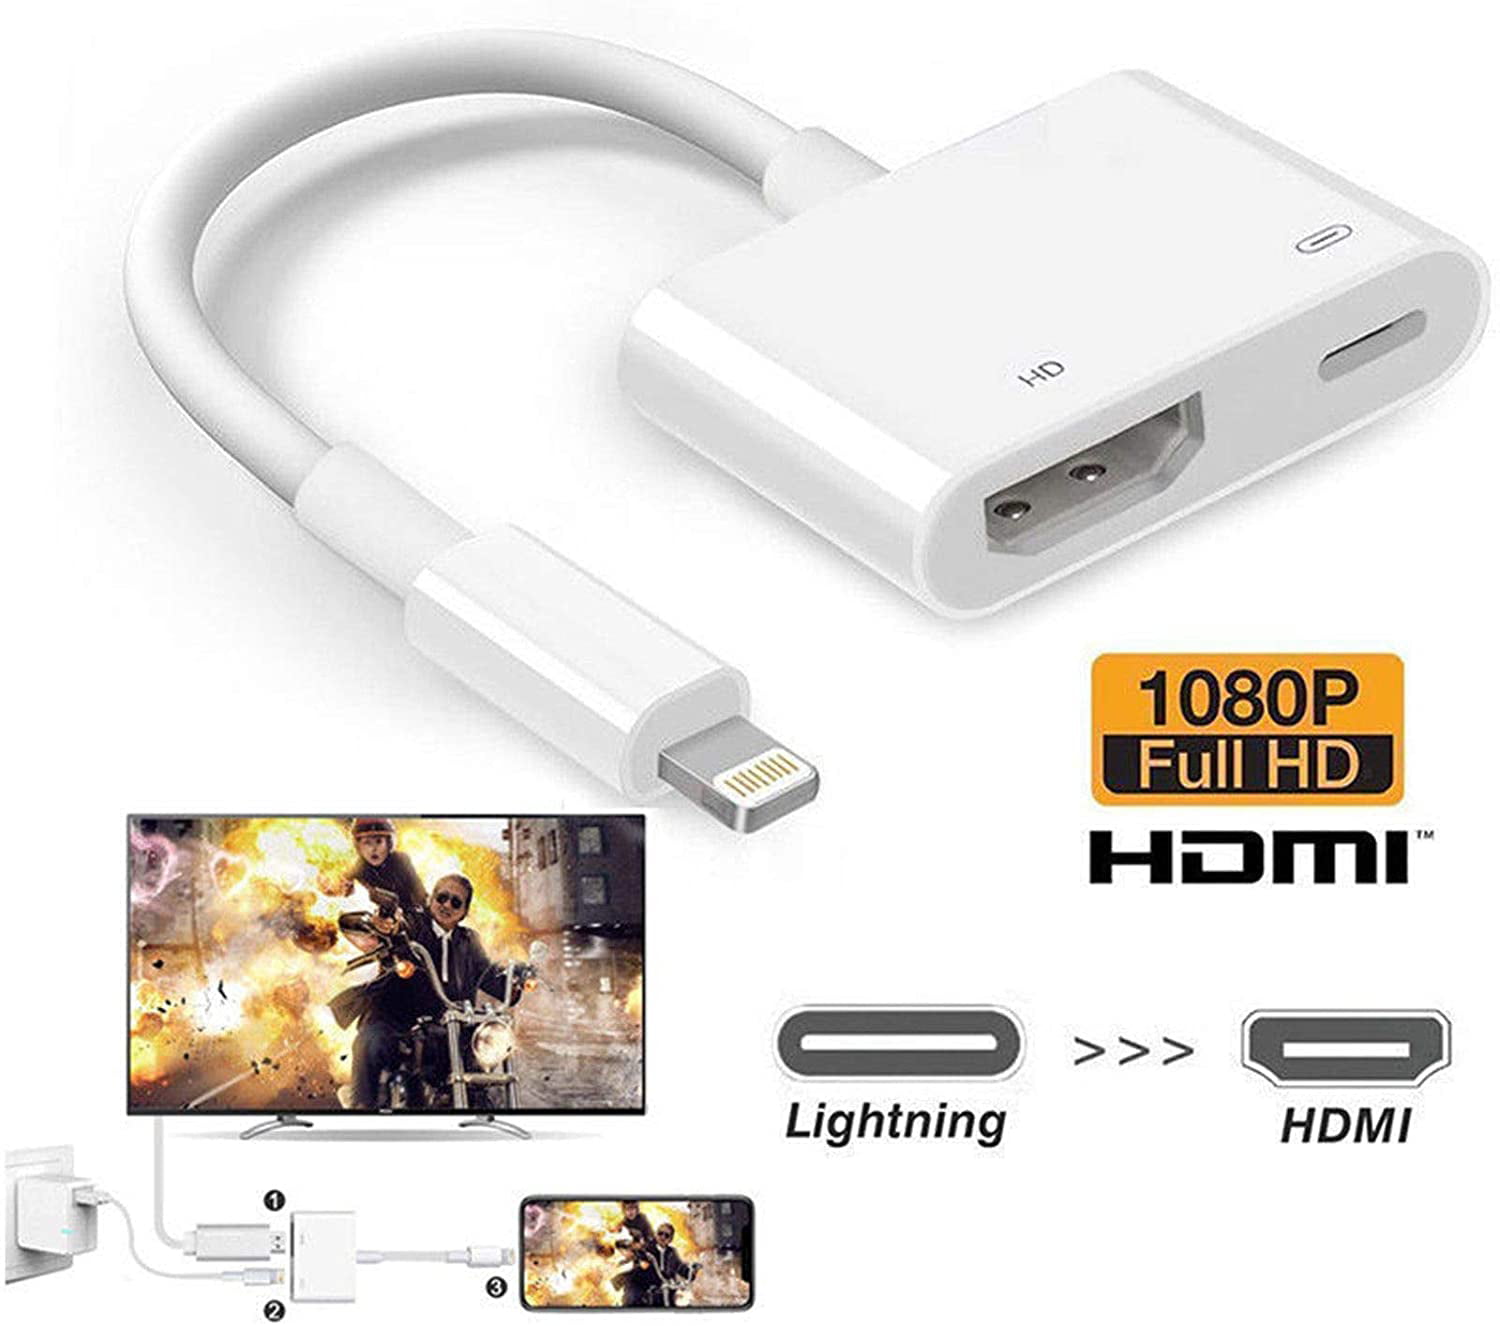 1080P HDMI Sync Screen Connector with Charging for iPhone 11 Pro X Xs Max Xr 7 8 Plus iPad on HDTV/Monitor/Projector Lightning to HDMI Digital Audio AV Adapter Support iOS 13 Apple MFi Certified